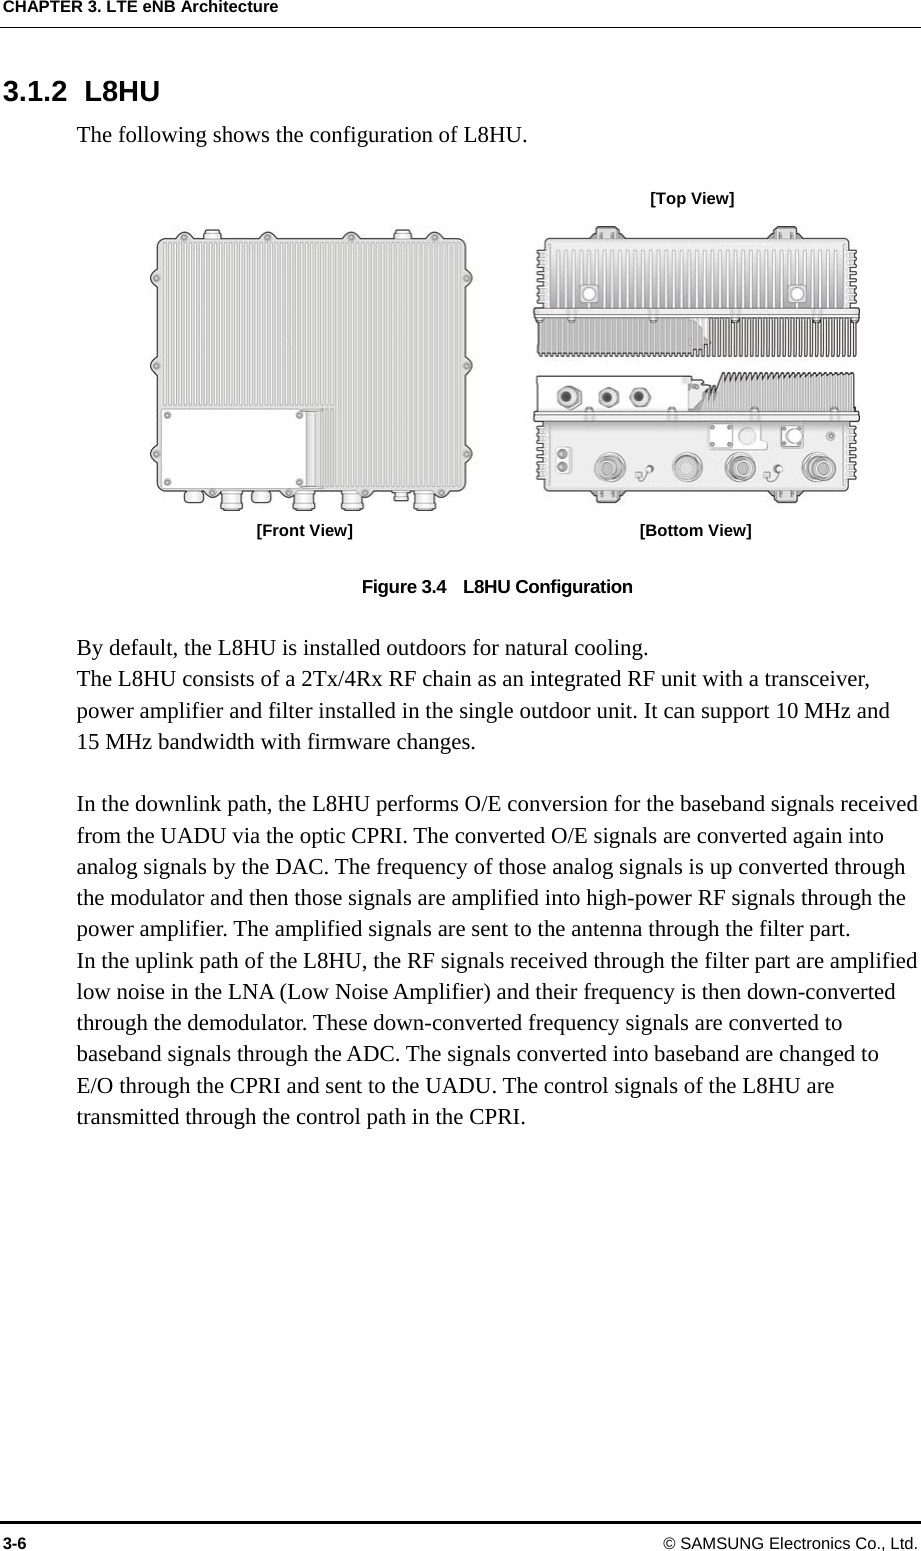 CHAPTER 3. LTE eNB Architecture 3.1.2 L8HU The following shows the configuration of L8HU.  [Top View] [Front View]  [Bottom View] Figure 3.4    L8HU Configuration  By default, the L8HU is installed outdoors for natural cooling. The L8HU consists of a 2Tx/4Rx RF chain as an integrated RF unit with a transceiver, power amplifier and filter installed in the single outdoor unit. It can support 10 MHz and 15 MHz bandwidth with firmware changes.    In the downlink path, the L8HU performs O/E conversion for the baseband signals received from the UADU via the optic CPRI. The converted O/E signals are converted again into analog signals by the DAC. The frequency of those analog signals is up converted through the modulator and then those signals are amplified into high-power RF signals through the power amplifier. The amplified signals are sent to the antenna through the filter part. In the uplink path of the L8HU, the RF signals received through the filter part are amplified low noise in the LNA (Low Noise Amplifier) and their frequency is then down-converted through the demodulator. These down-converted frequency signals are converted to baseband signals through the ADC. The signals converted into baseband are changed to E/O through the CPRI and sent to the UADU. The control signals of the L8HU are transmitted through the control path in the CPRI.    3-6 © SAMSUNG Electronics Co., Ltd. 